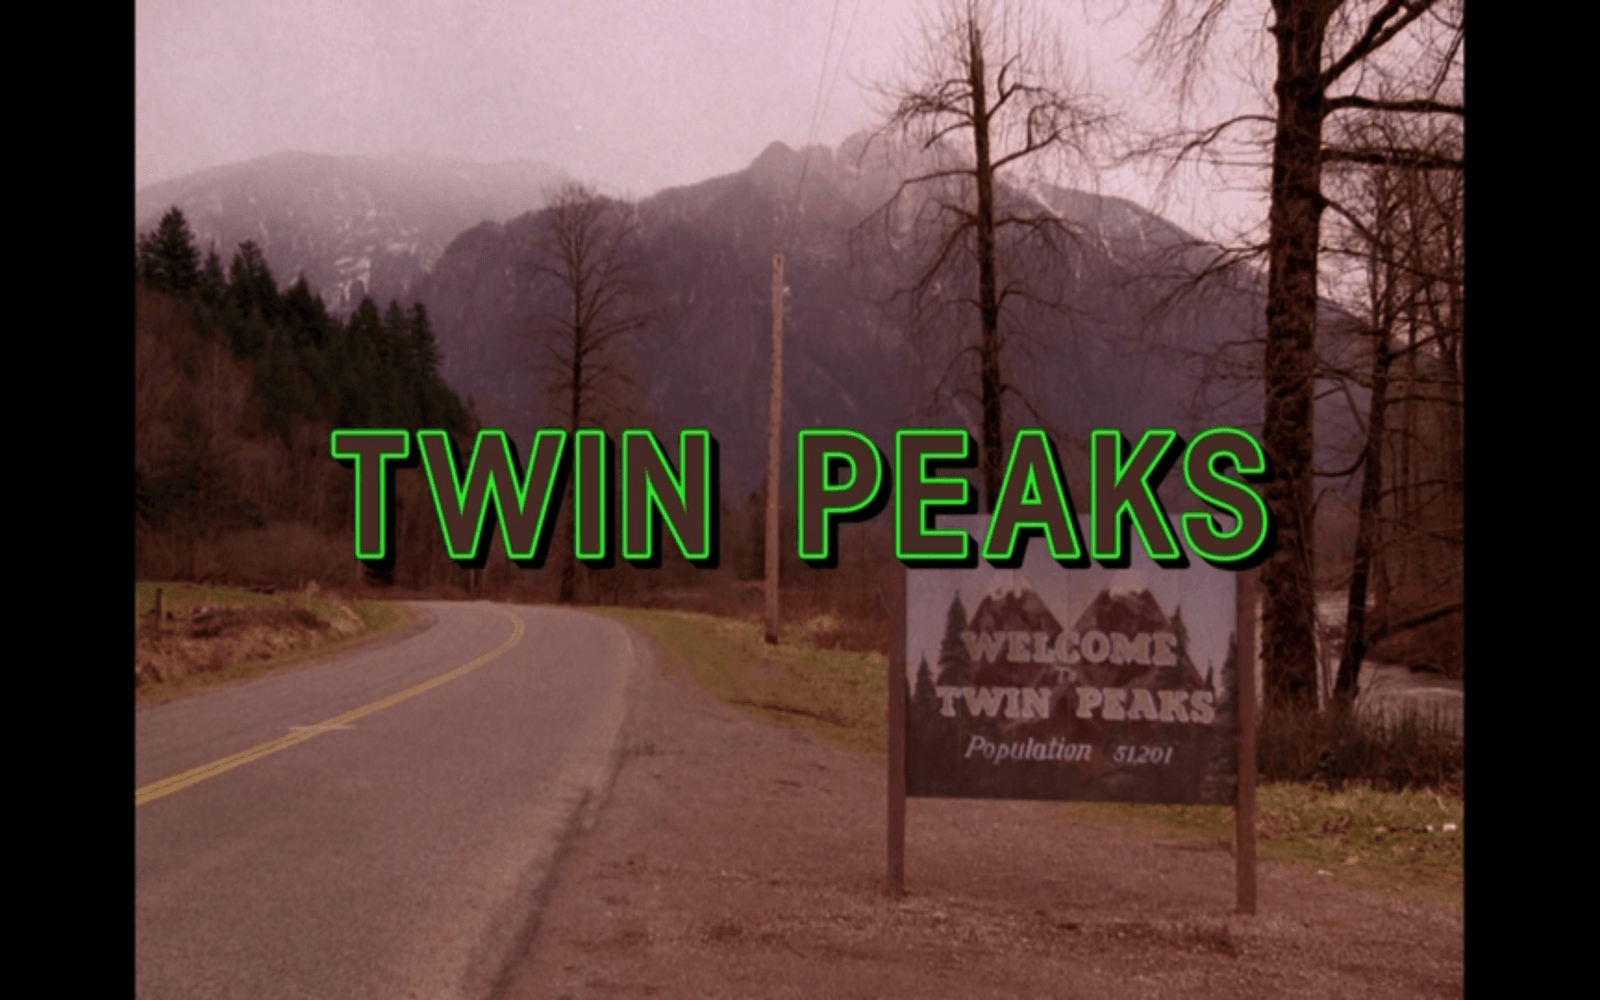 Twin Peaks Returning To TV, Lynch to Direct!